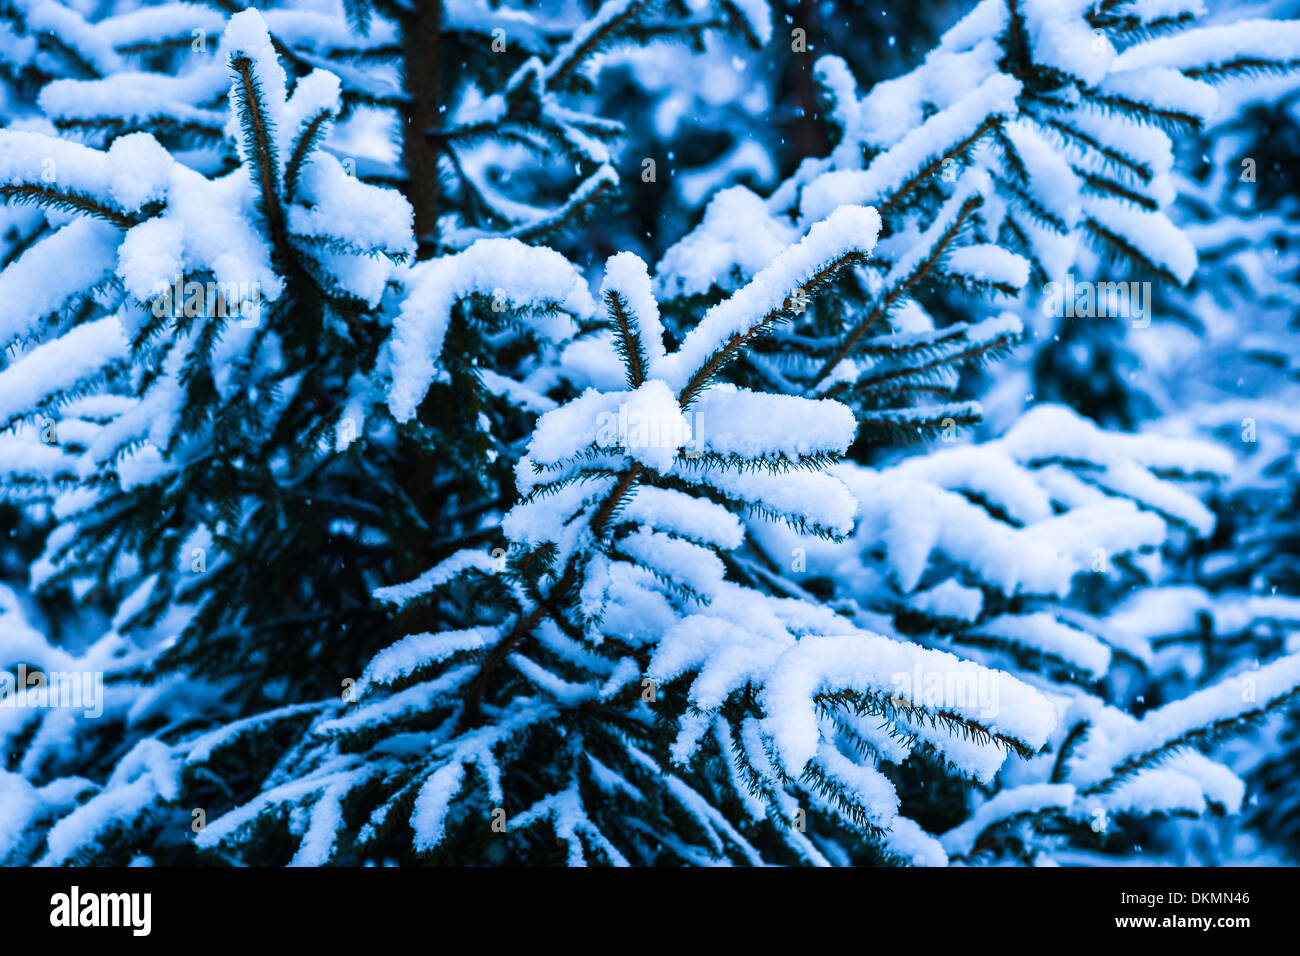 Winter Snow Christmas Tree 11. Fresh snow covered spruce trees in the forest in snowstorm. Dark green, blue and white colors. Stock Photo